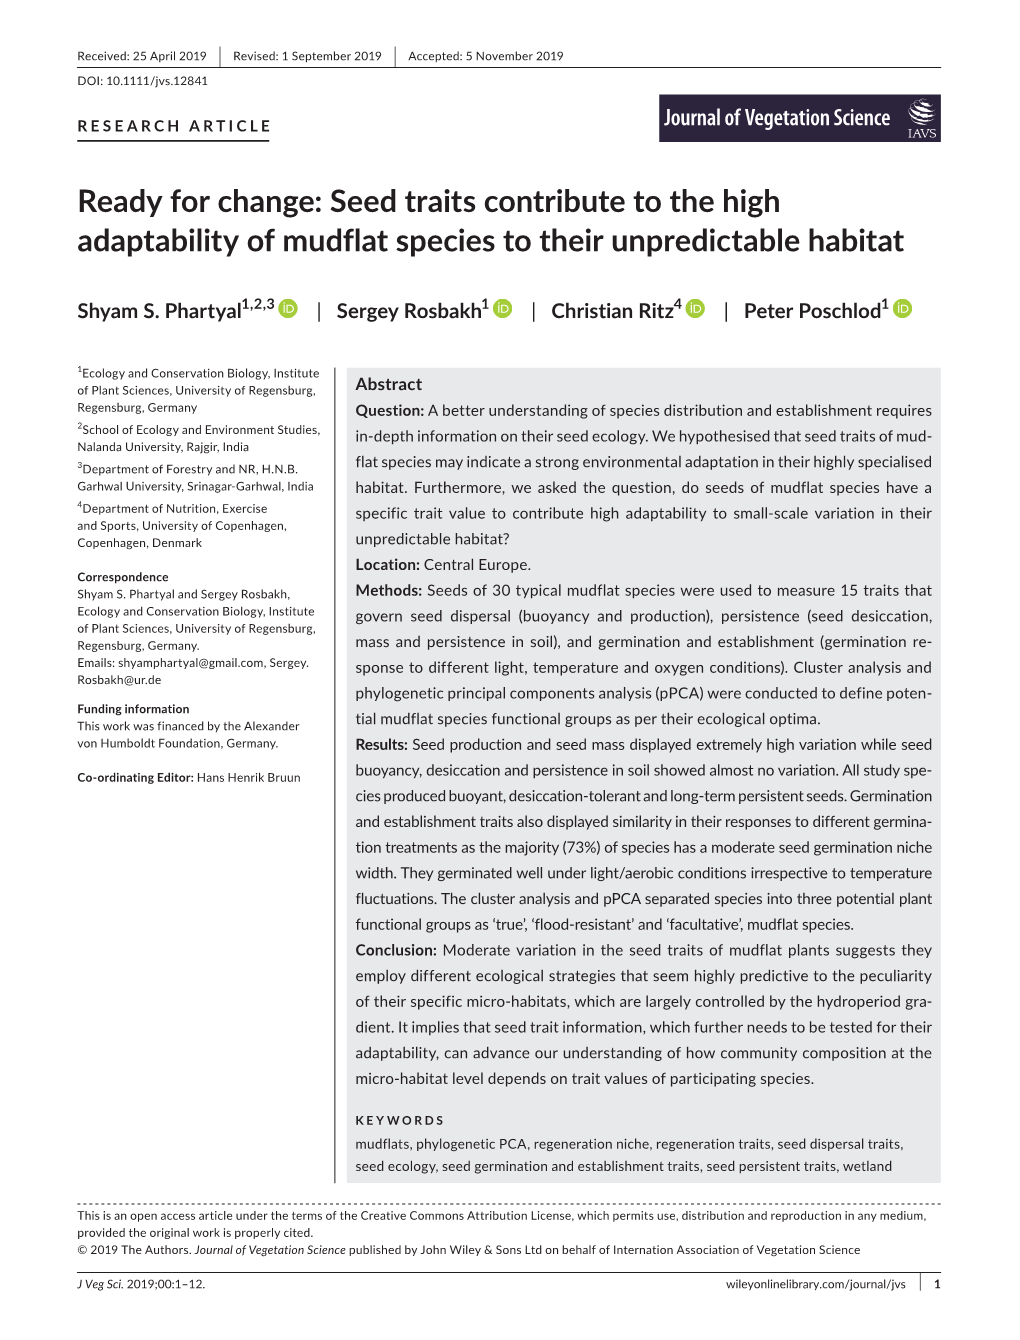 Seed Traits Contribute to the High Adaptability of Mudflat Species to Their Unpredictable Habitat